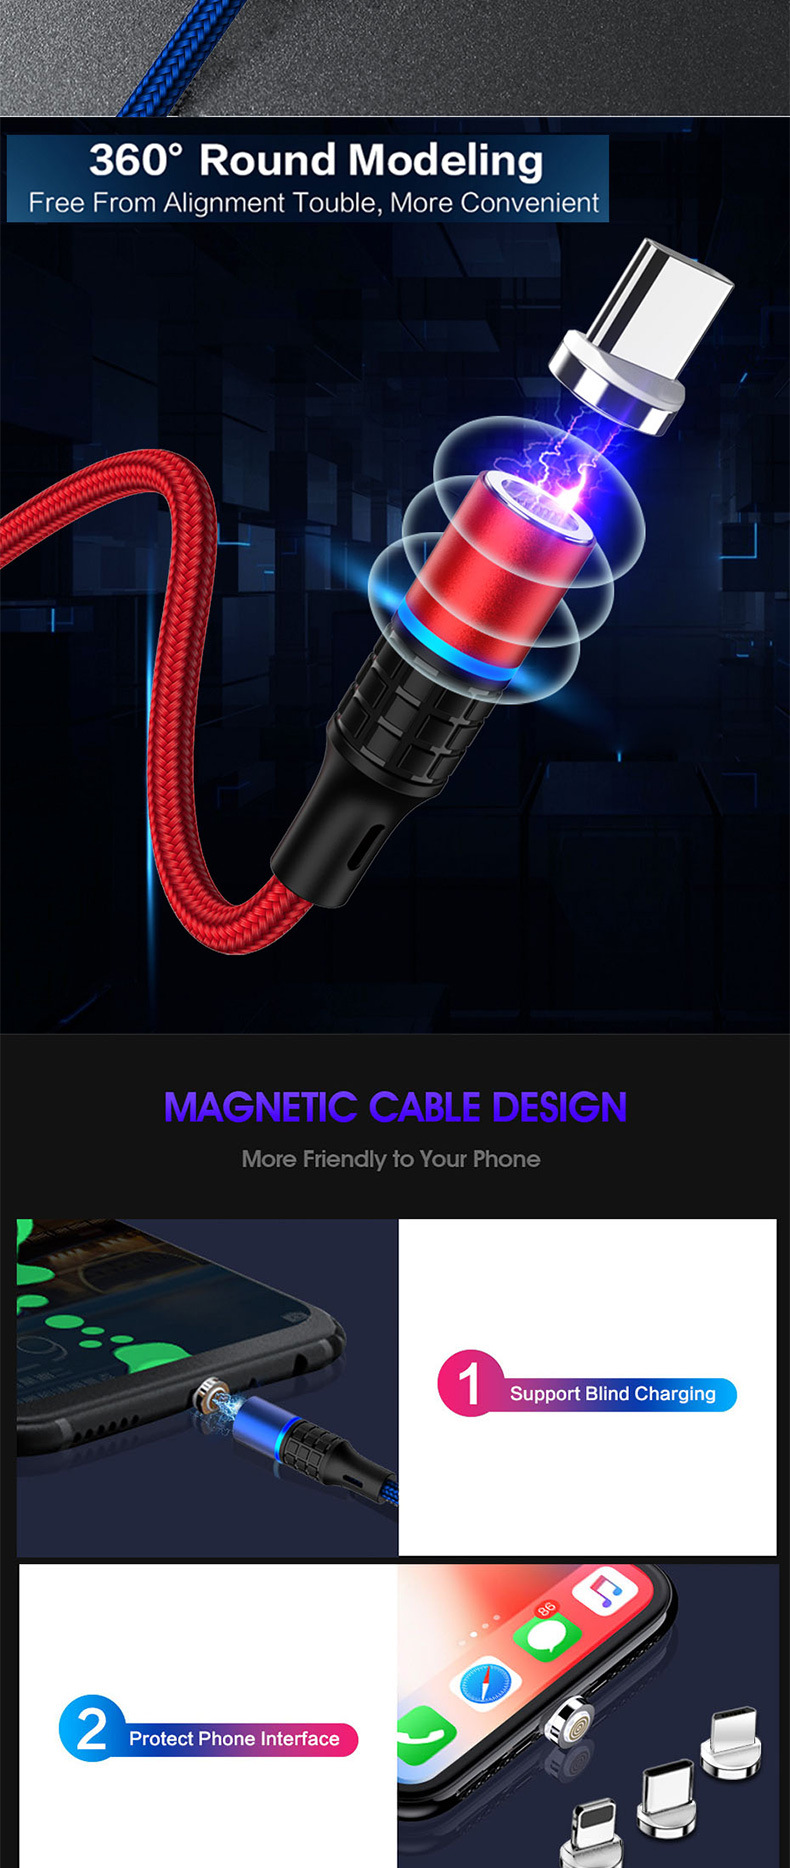 Marjay 3A Type C Micro USB LED Indicator Magnetic Fast Charging Data Cable For Huawei P30 Pro Mate 30 Mi9 7A 6Pro 9Pro S10+ Note10 